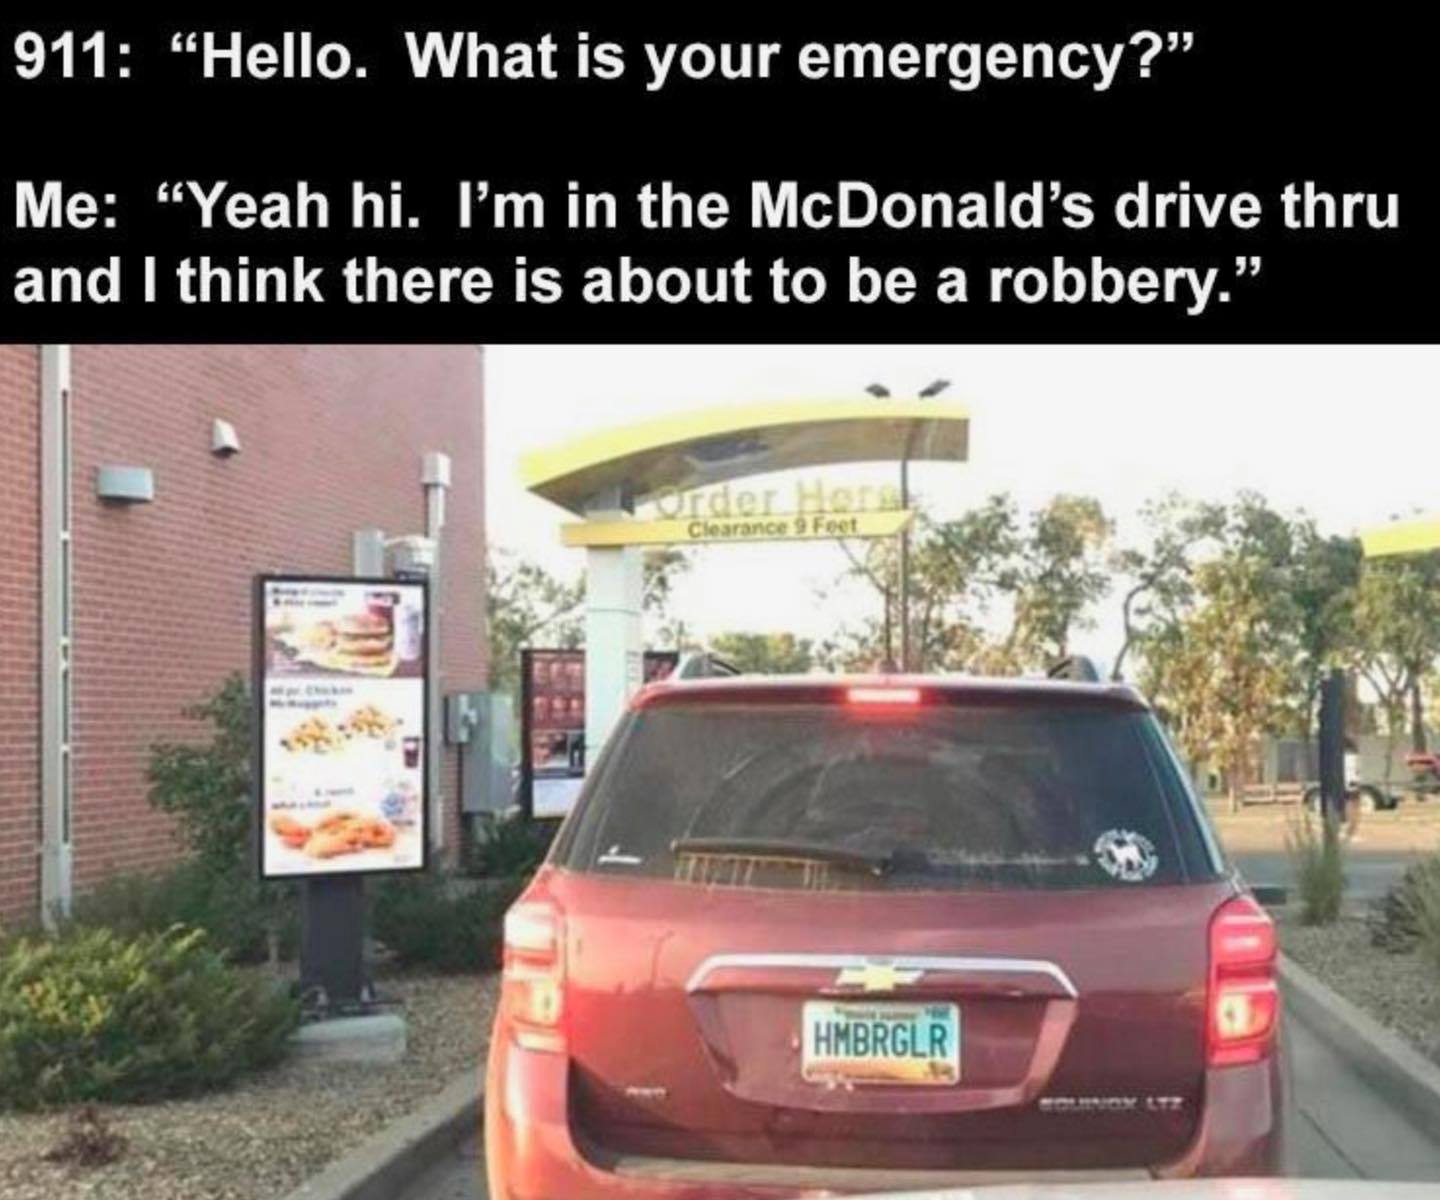 hmbrglr license plate - 911 "Hello. What is your emergency?" Me Yeah hi. I'm in the McDonald's drive thru and I think there is about to be a robbery. Order Horst Clearance 9 Feet Hmbrglr